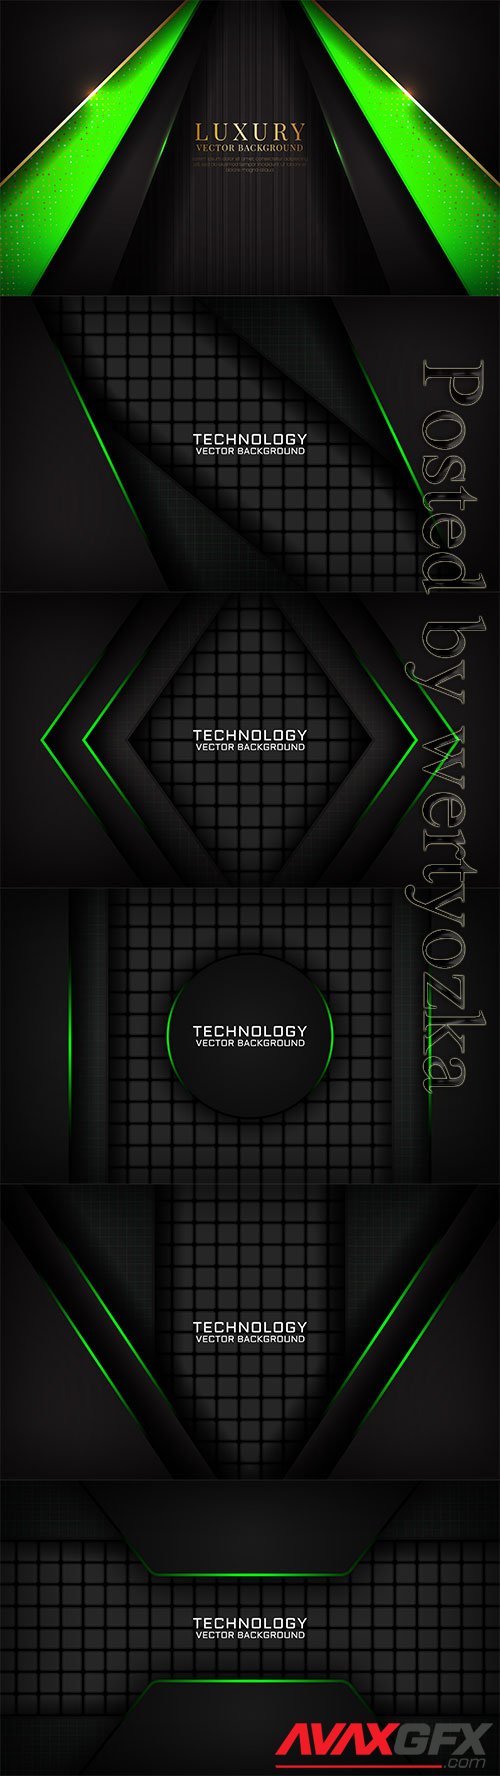 Abstract 3d black and green design technology background with light effect